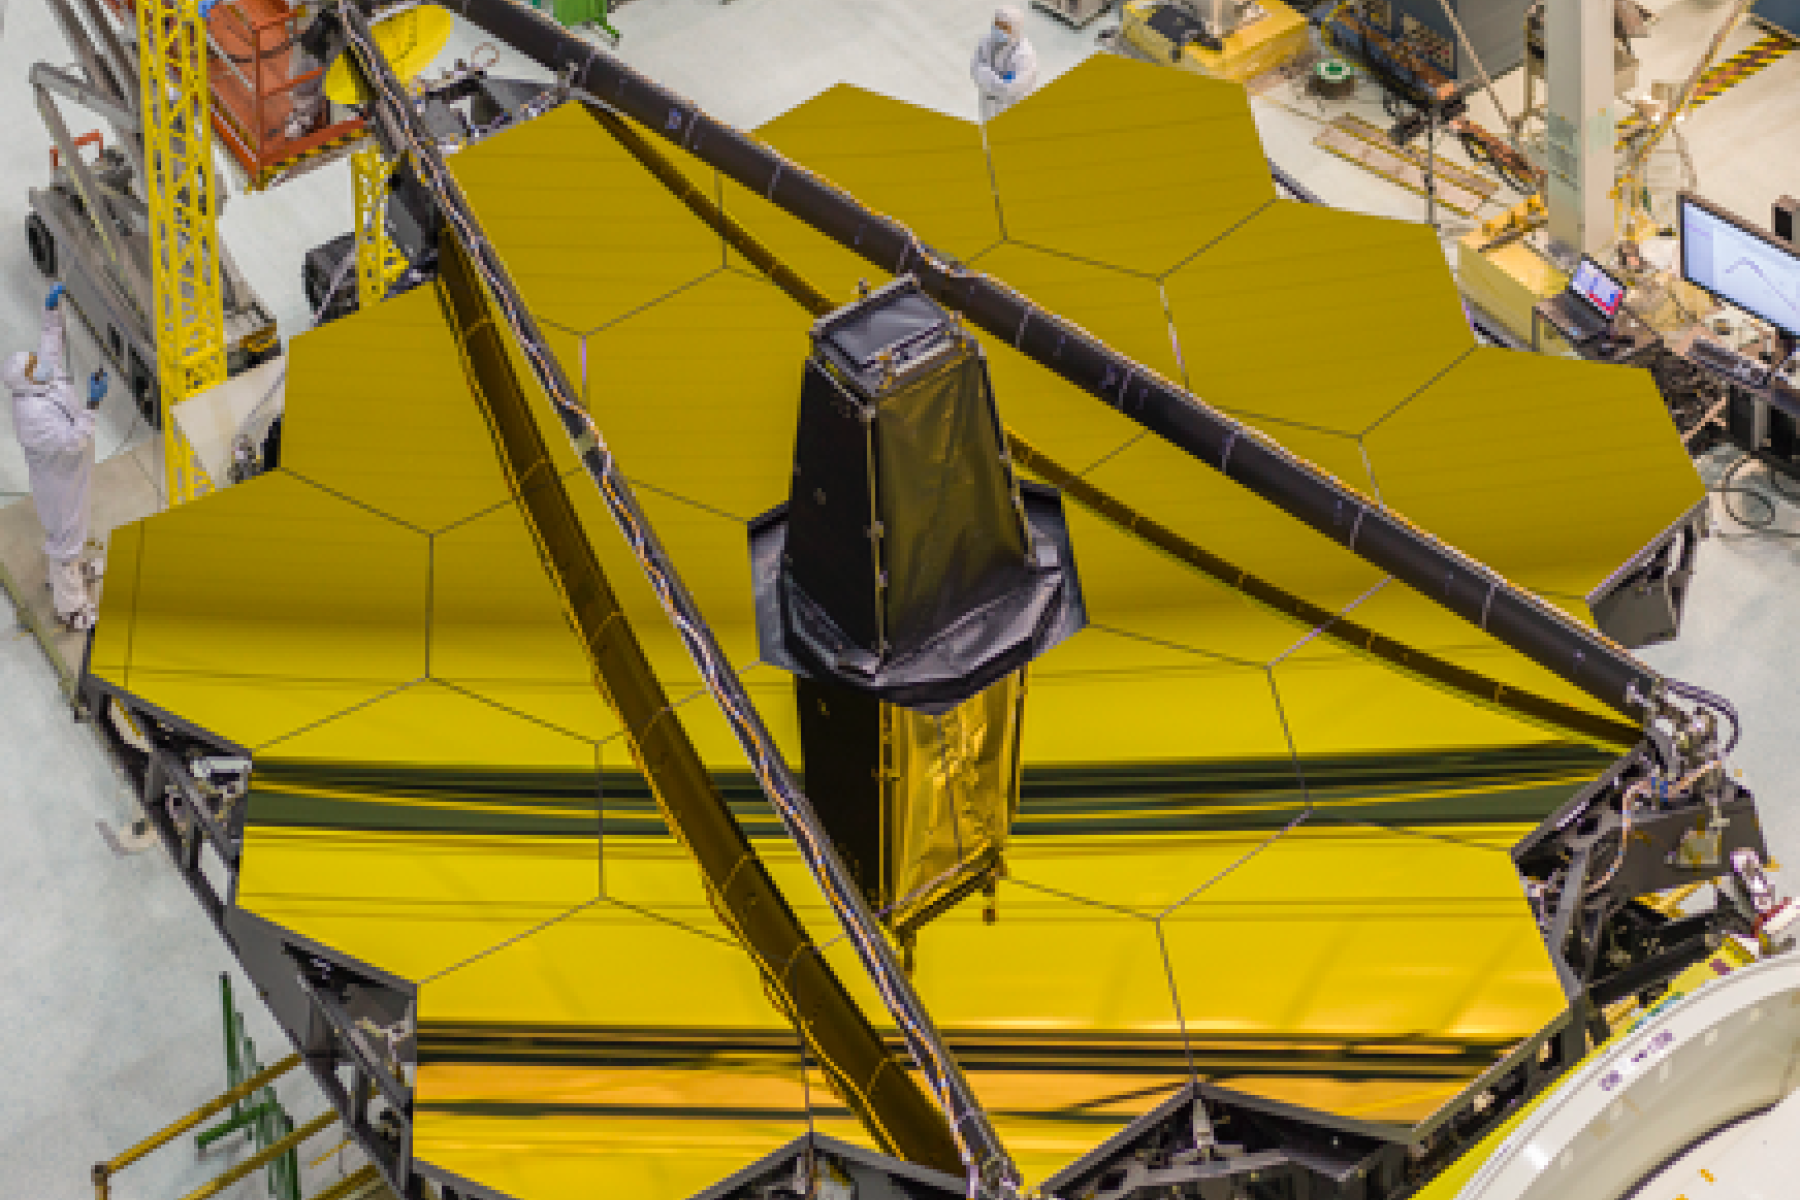 NASA image of some of the mirrors of the JamesWebb Space Telescope